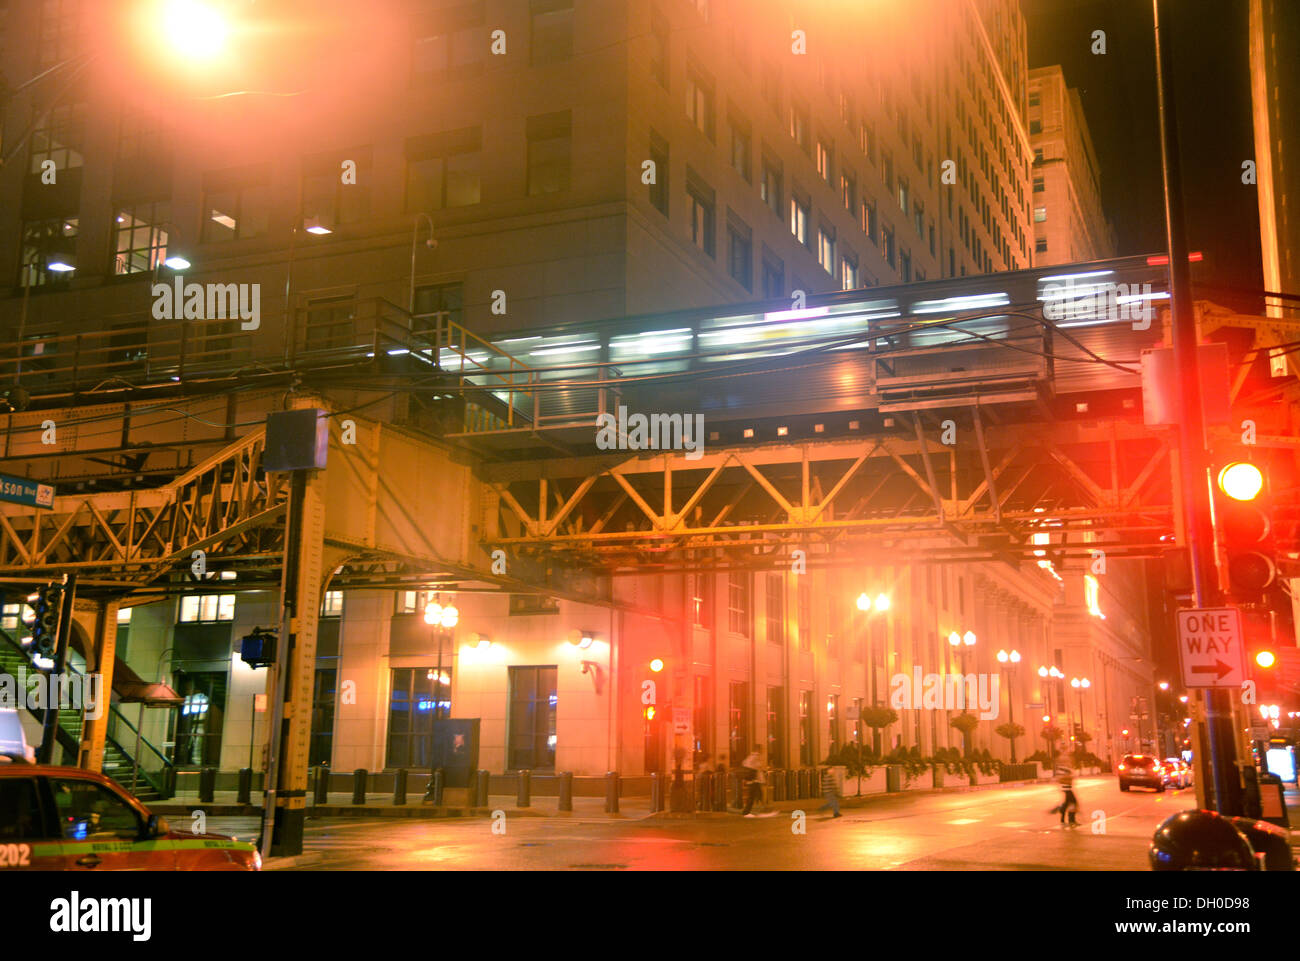 Chicago L Train at night. A train moves through the dark on the cities Elevated transit system seen in the dark Stock Photo